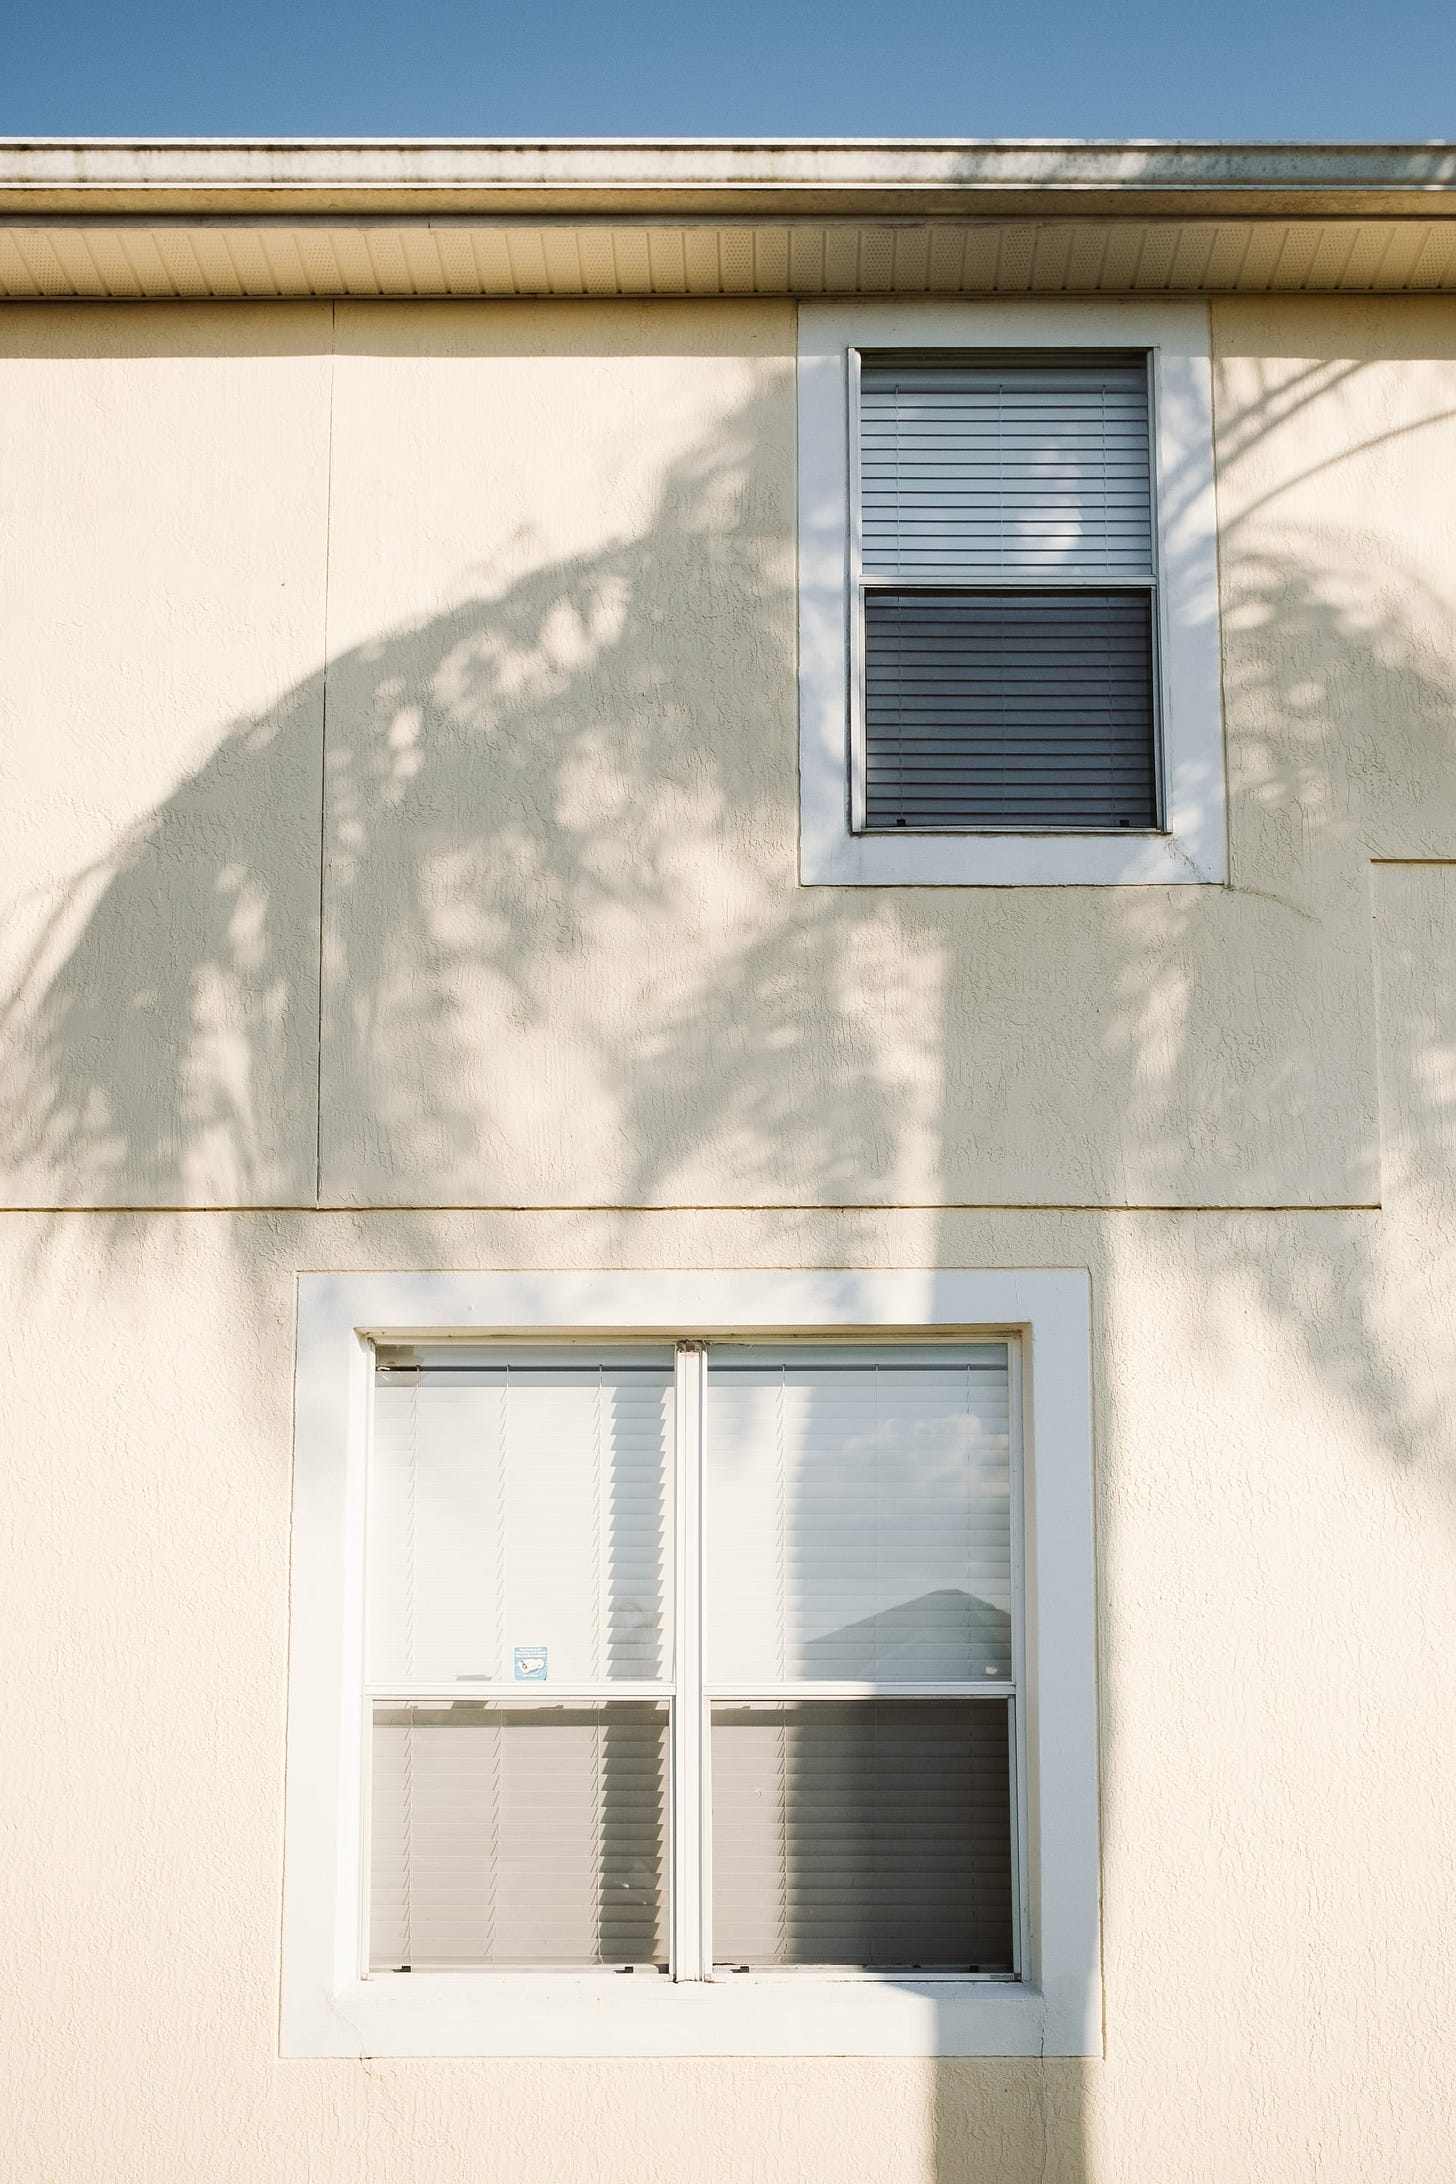 A sunny day; the shadow of a palm tree cast on the side wall and window of a house. A thin strip of blue sky at the top of the frame.